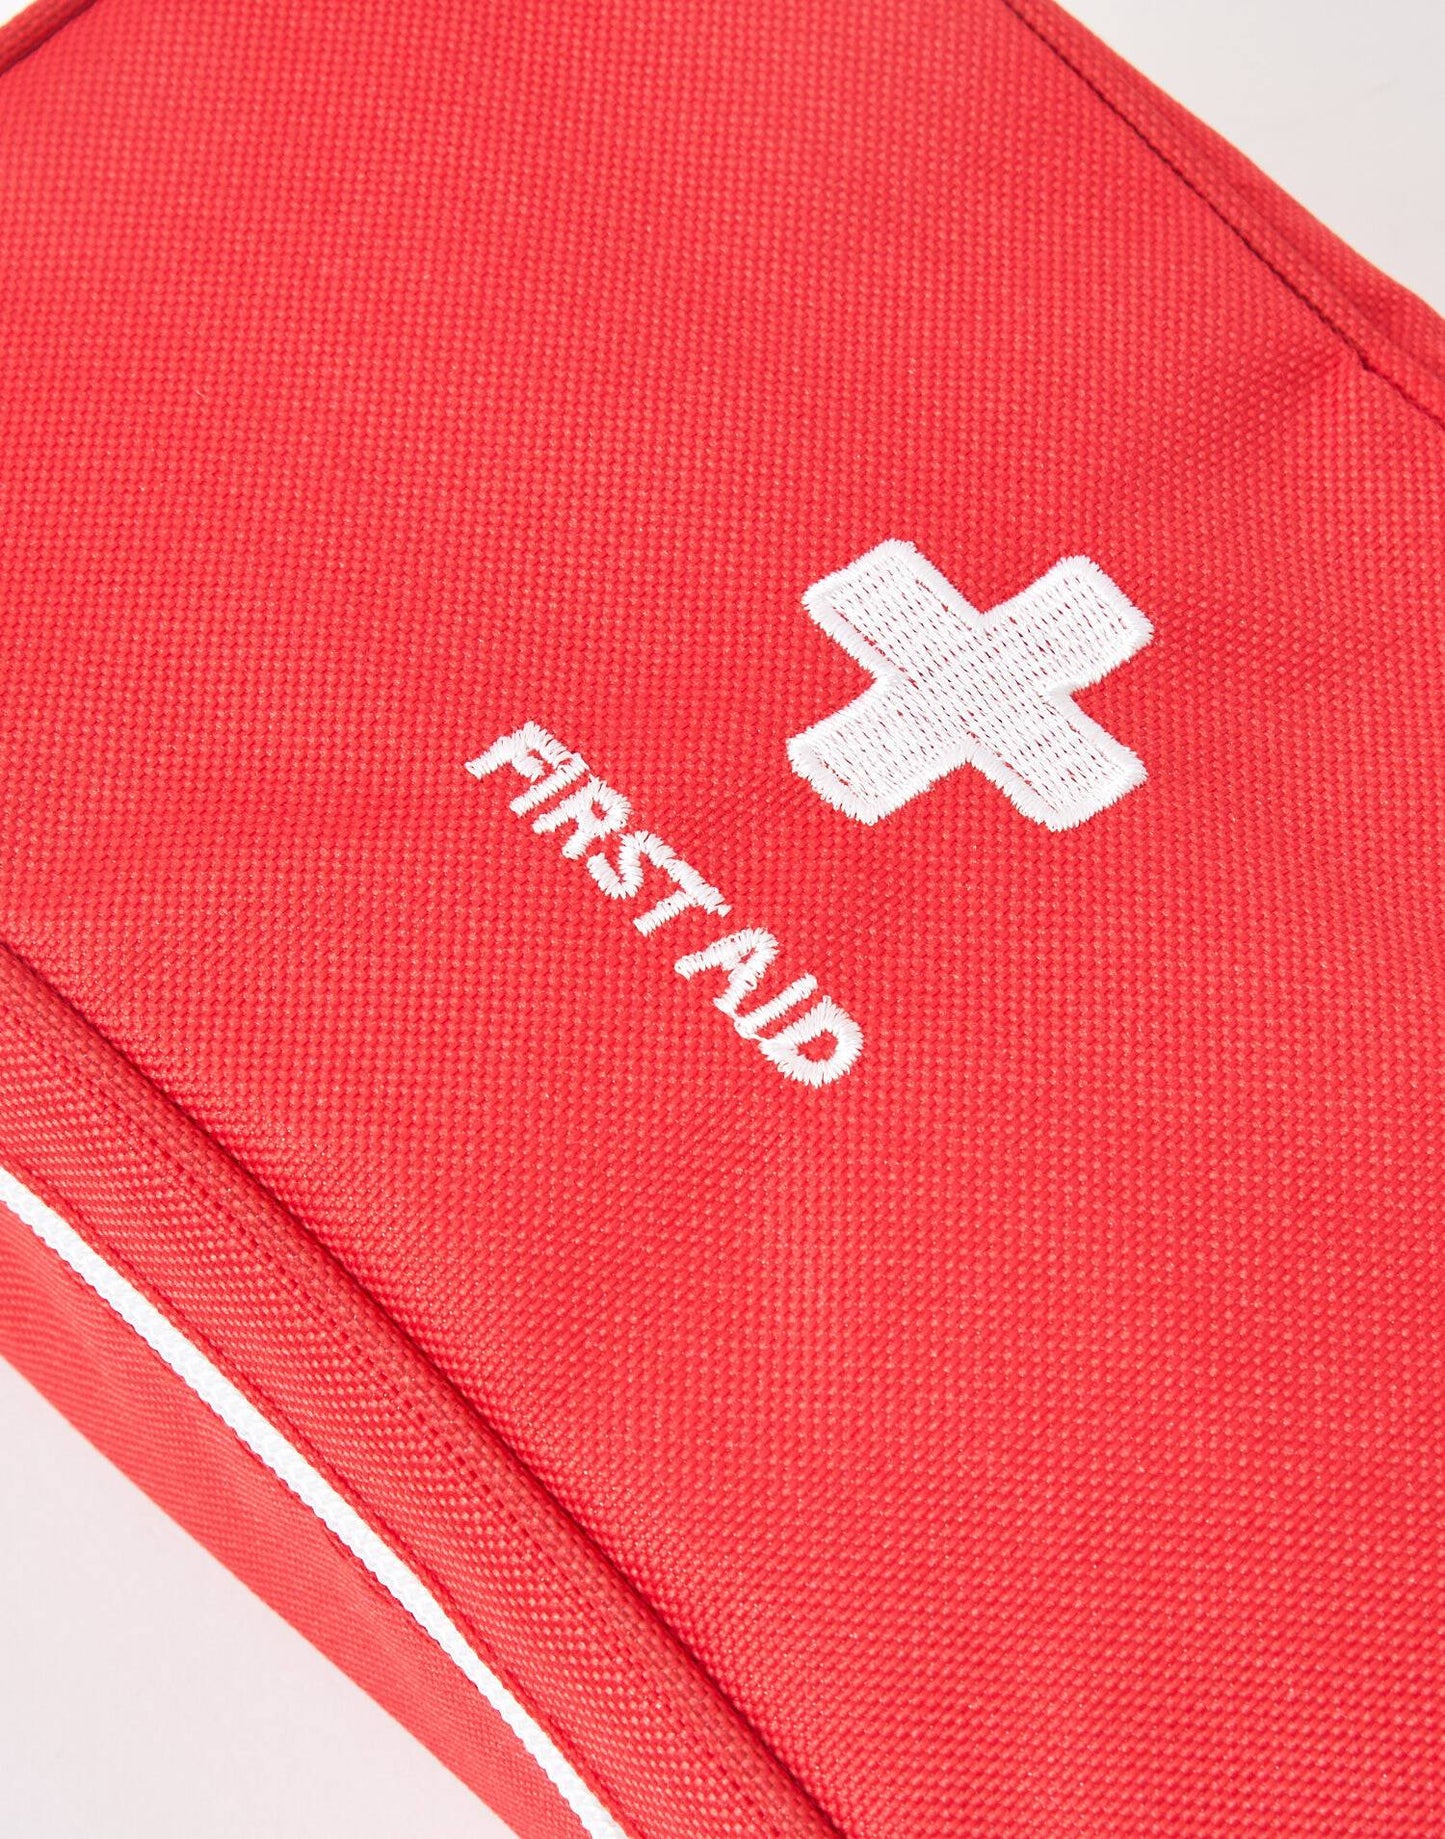 Travel first-aid kit case